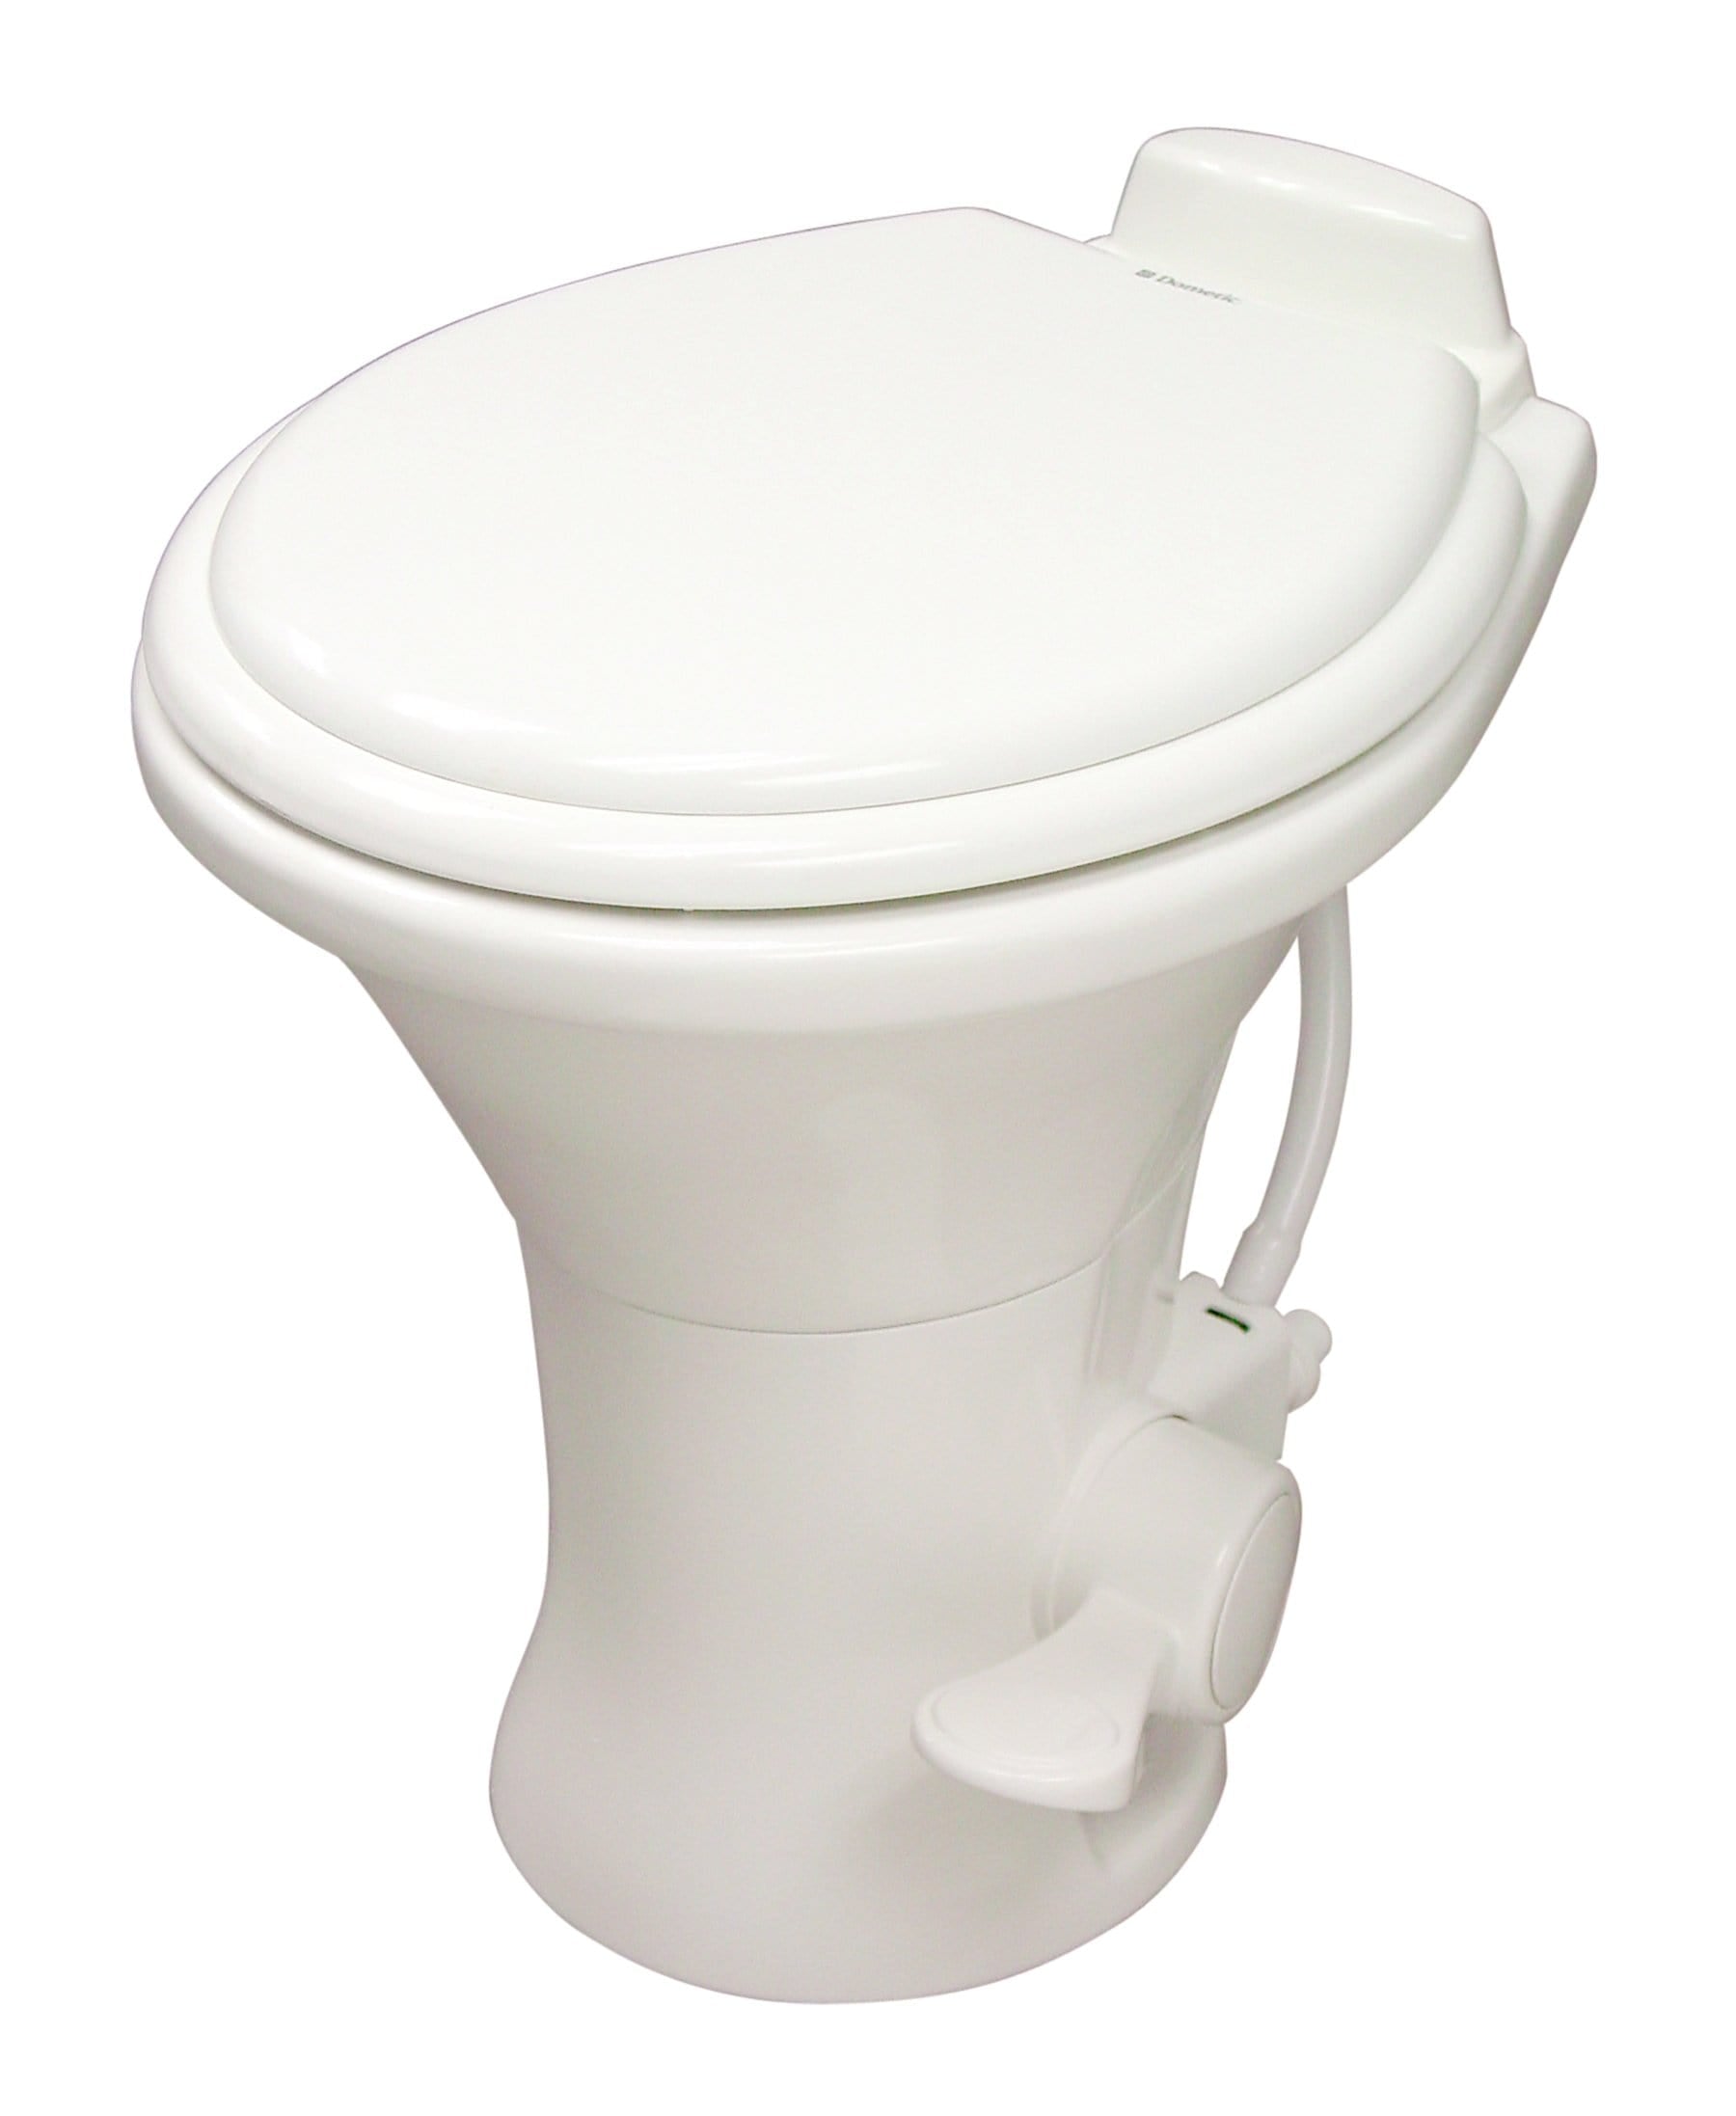 Dometic 302310171 310S White Standard Height Gravity Flush Porcelain Toilet With Hand Spray